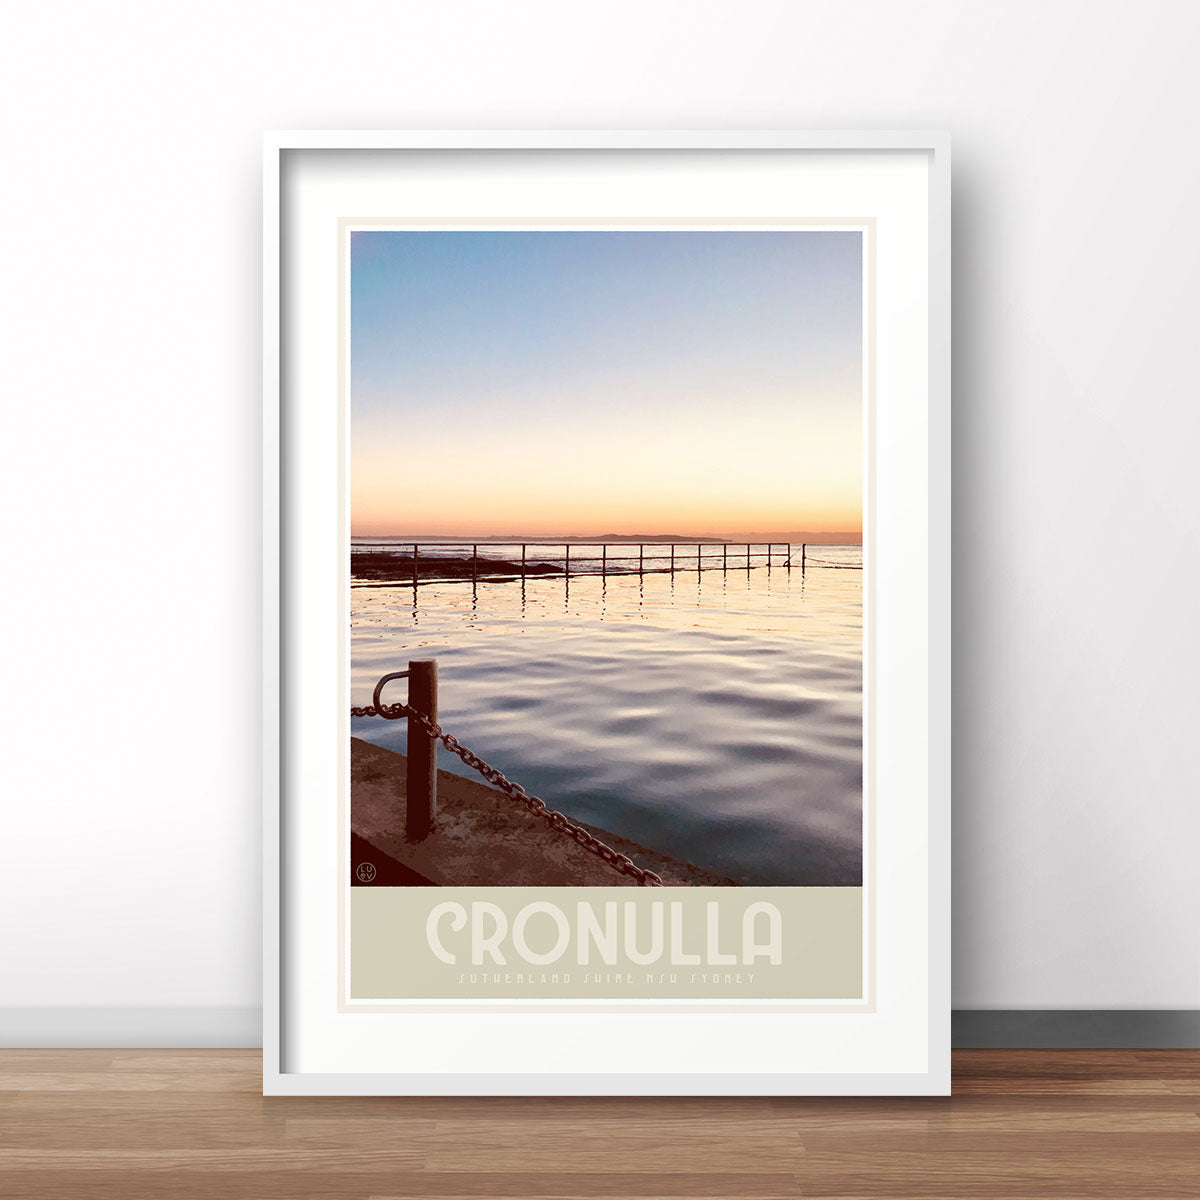 Cronulla beach pool vintage travel style poster by places we luv